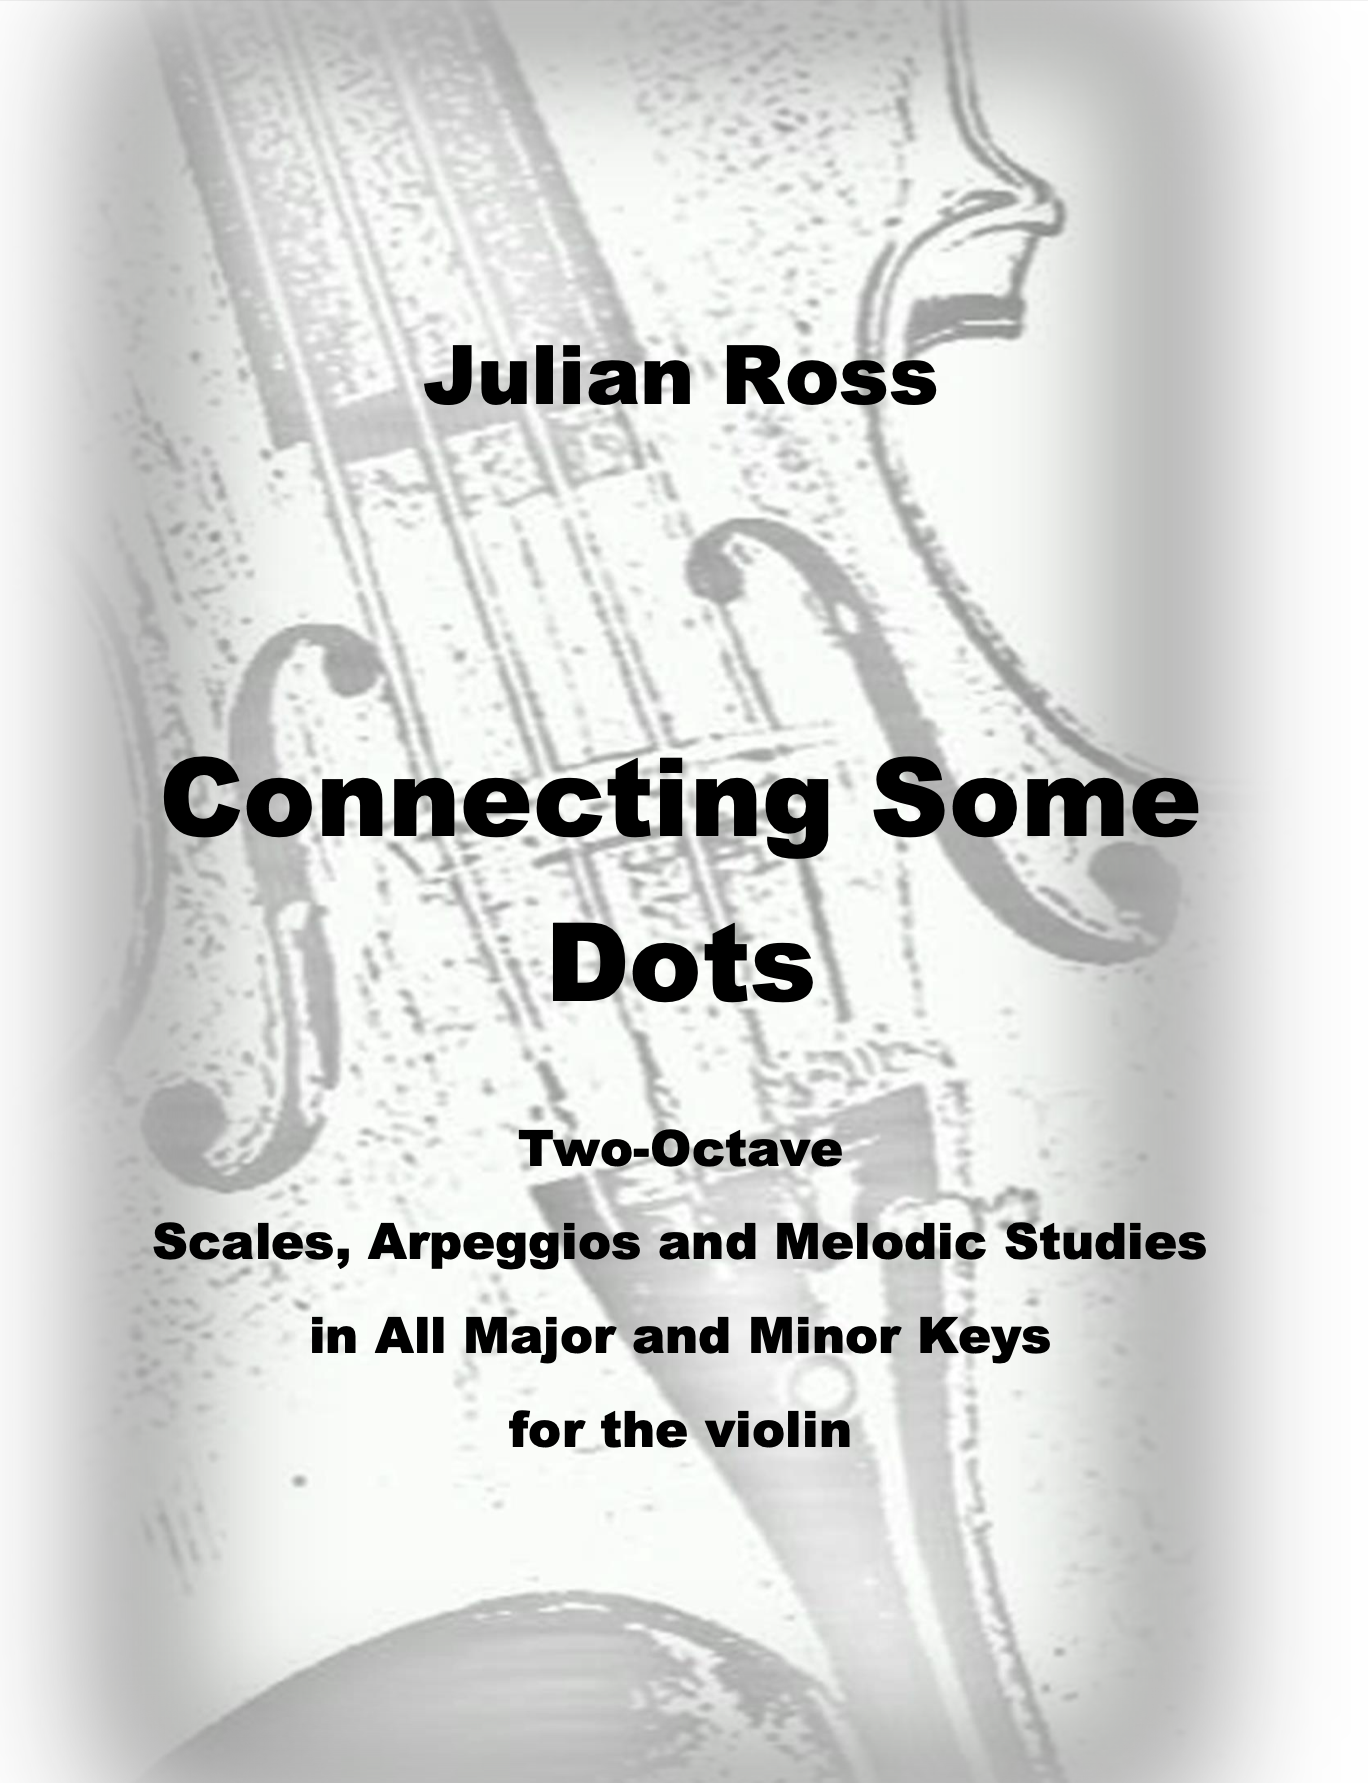 Connecting Some Dots by Julian Ross